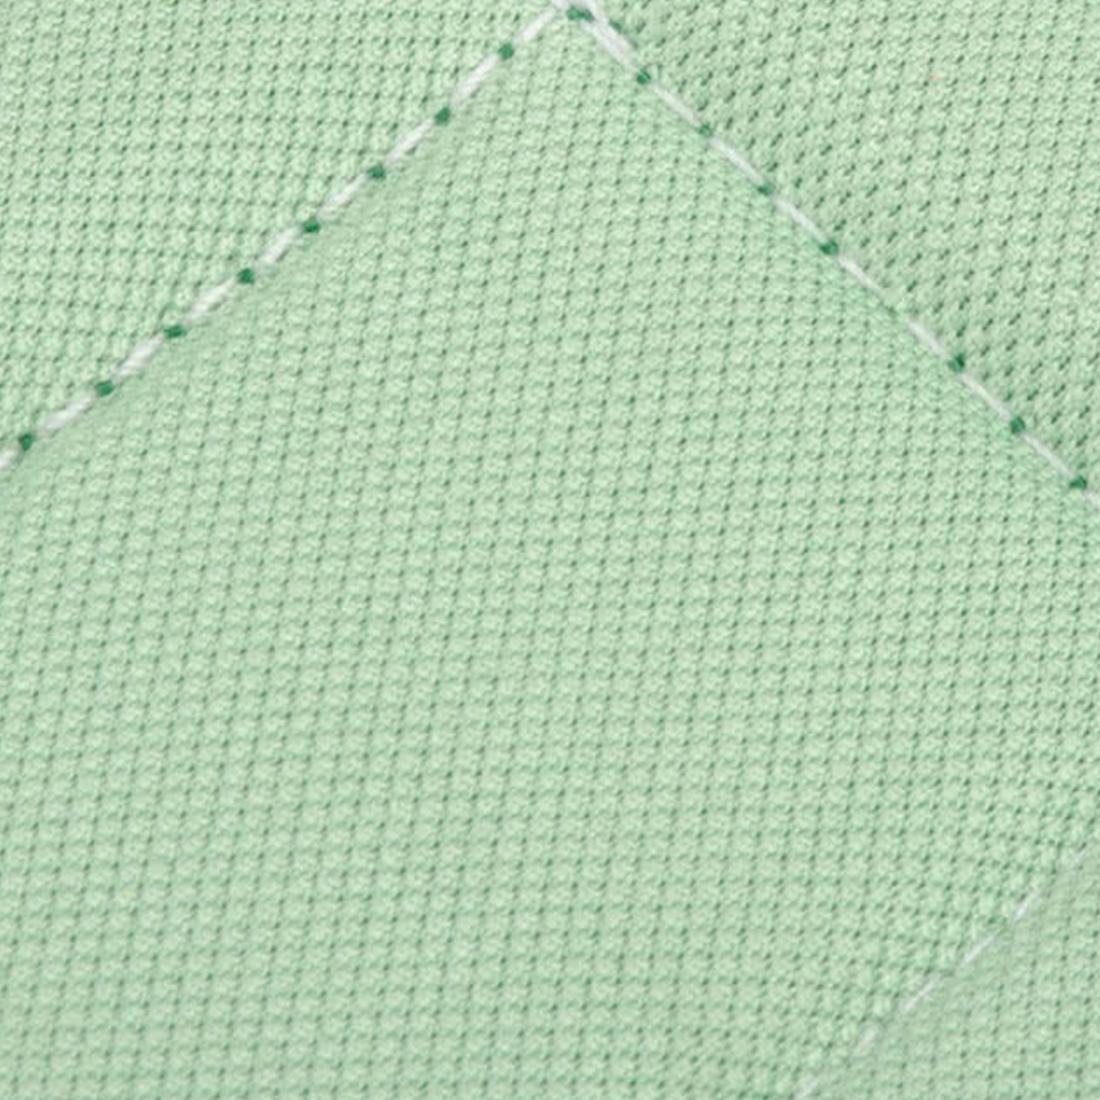 Unger Microfiber Cleaning Pad - Pad Detailed Close-Up View